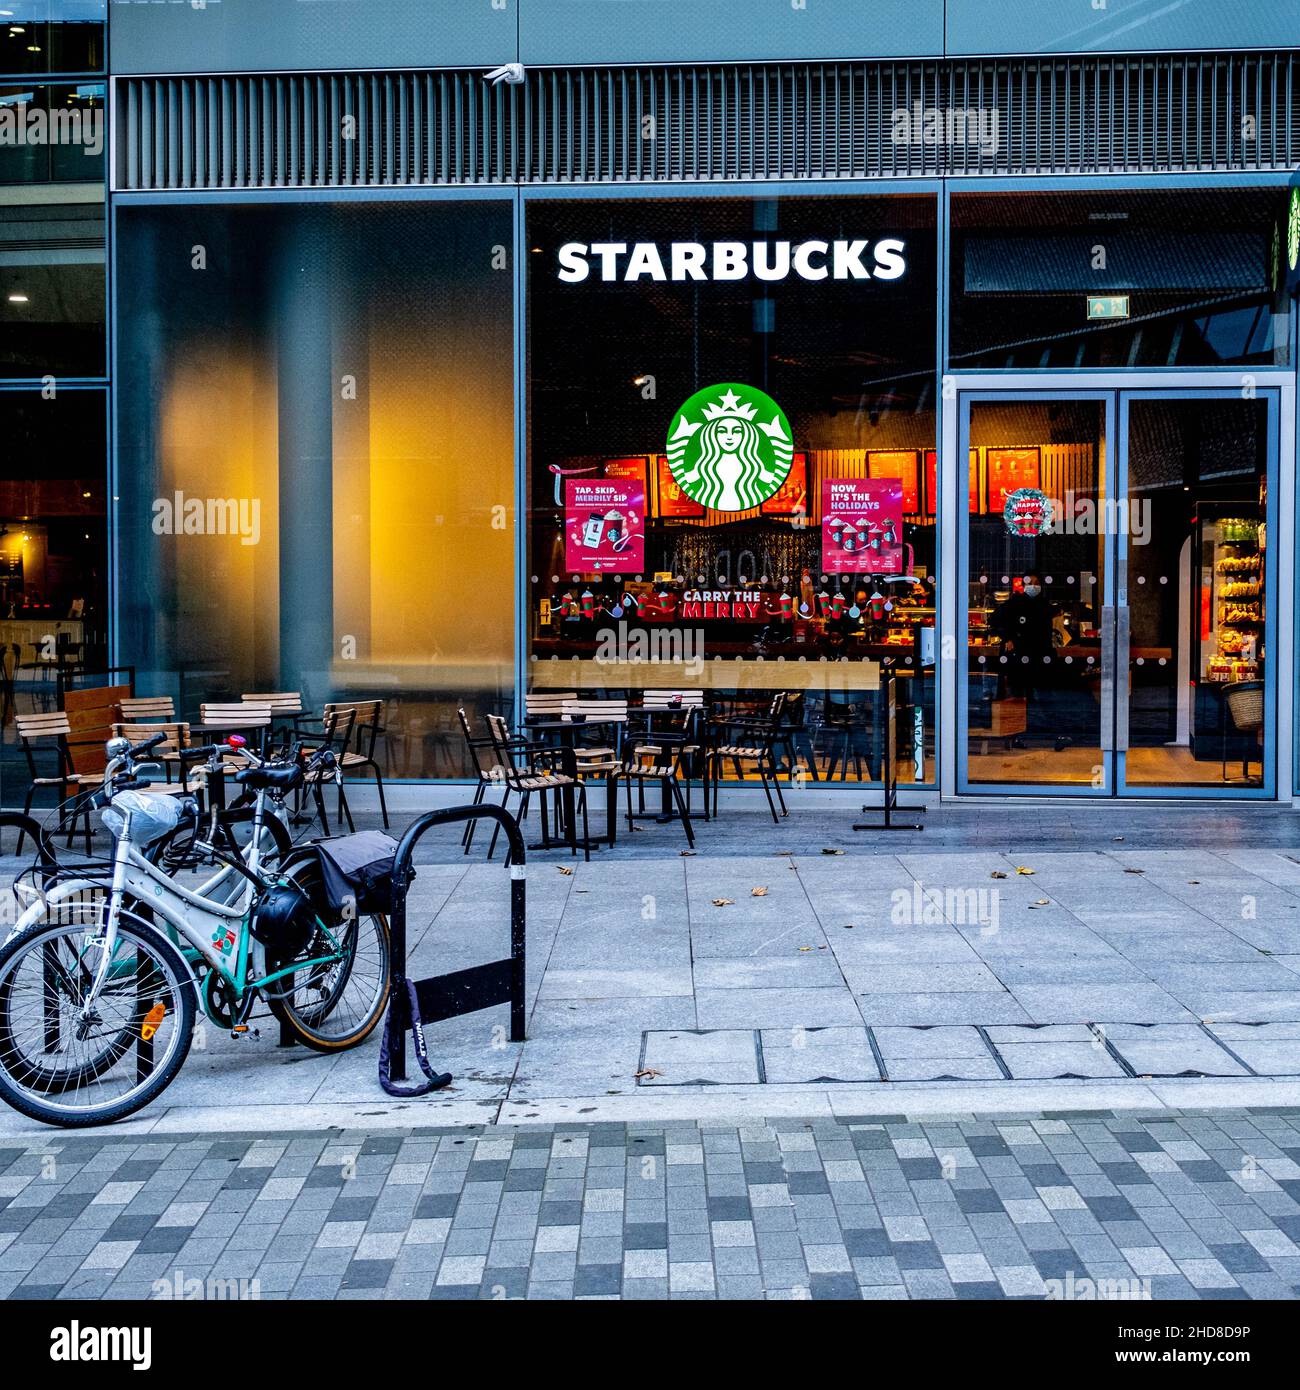 London England UK January 02 2022, Starbucks Coffee Shop Southbank London With No People and Parked Bicycles Stock Photo